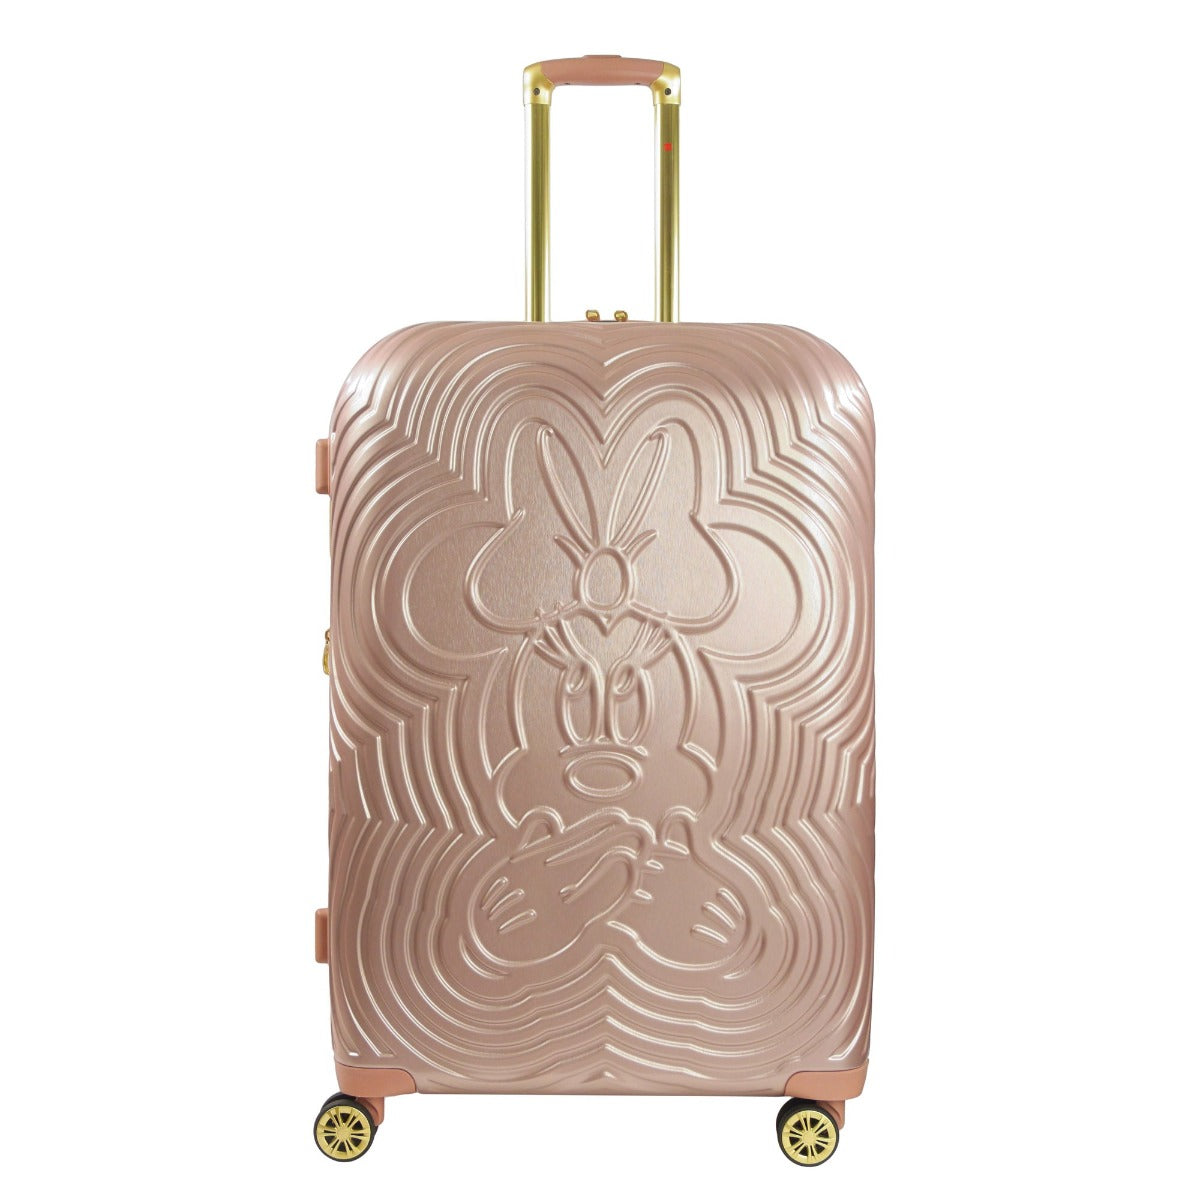 Disney Ful Playful Minnie Mouse 30.5 inch expandable hard sided spinner suitcase luggage check in rose gold